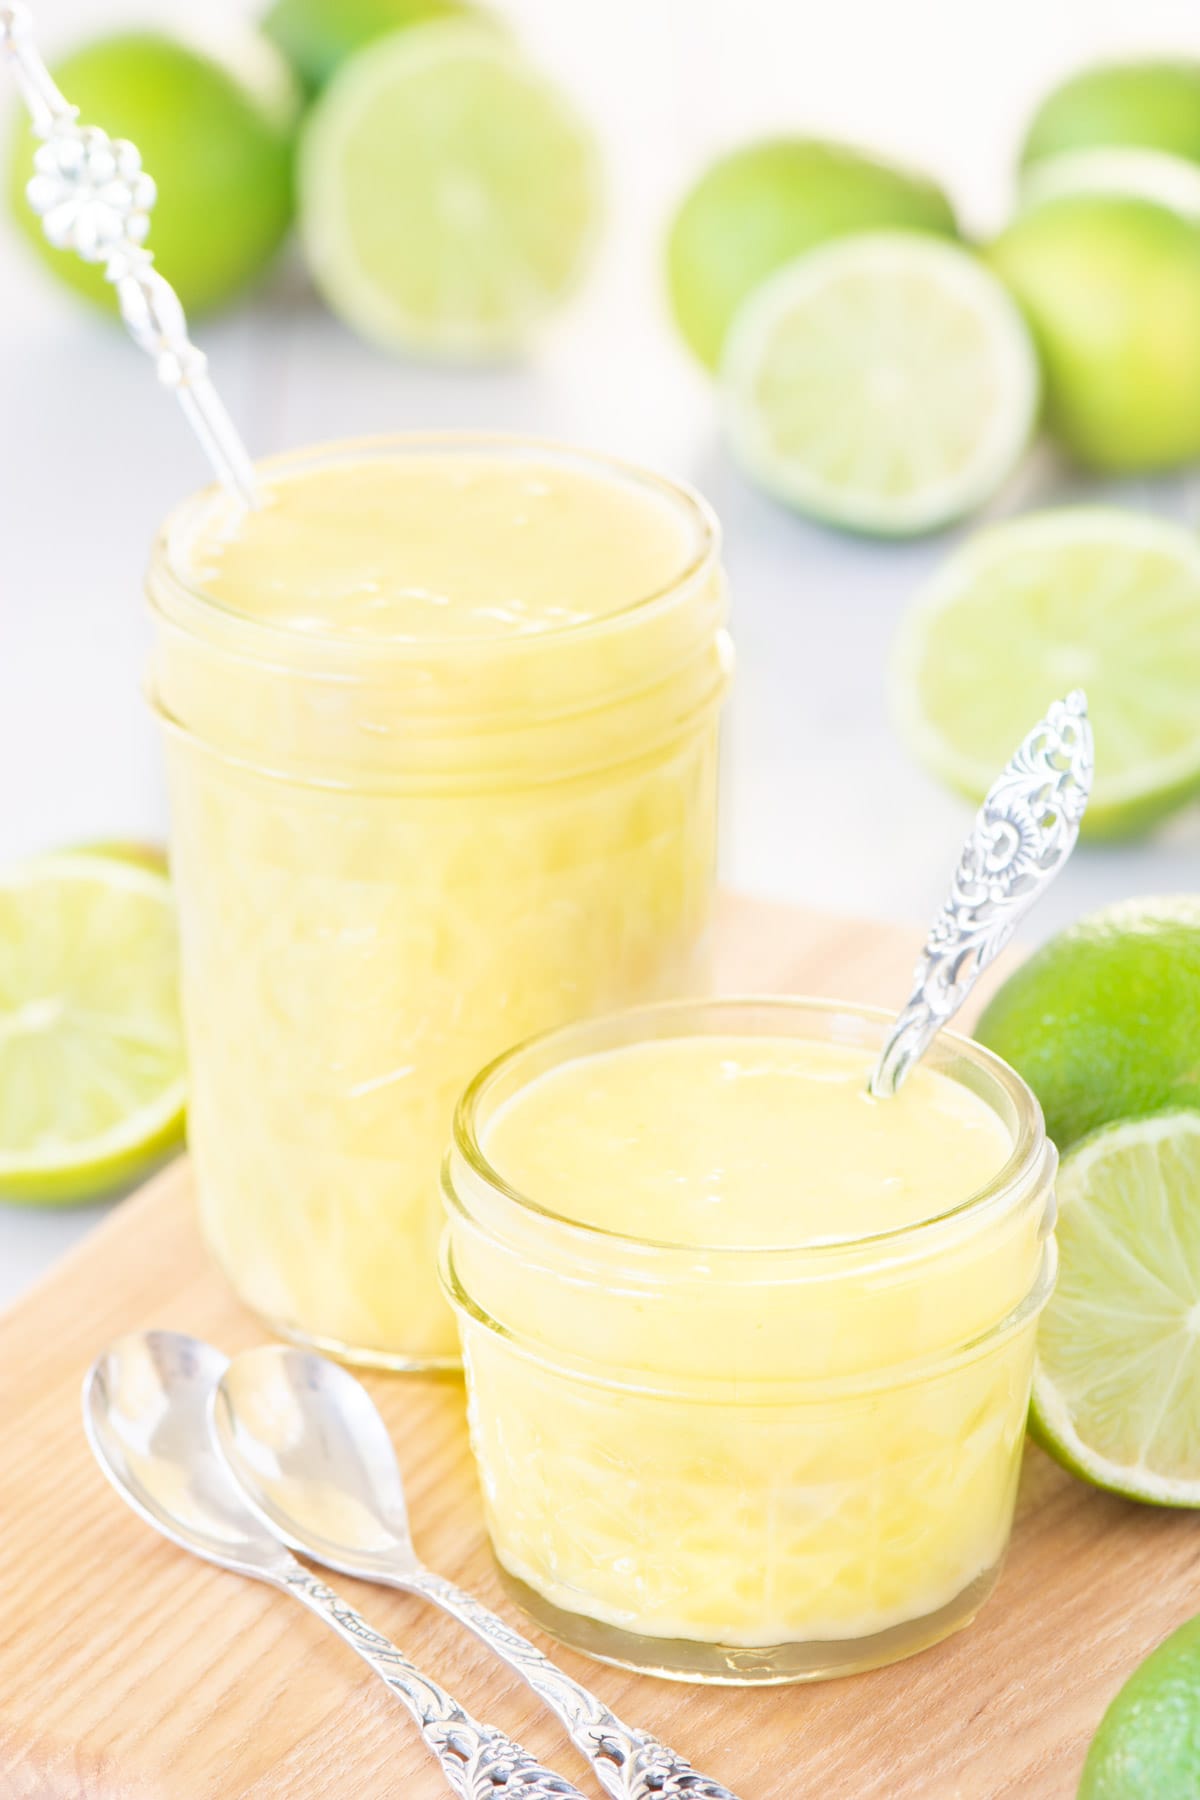 Two jars of lime curd.